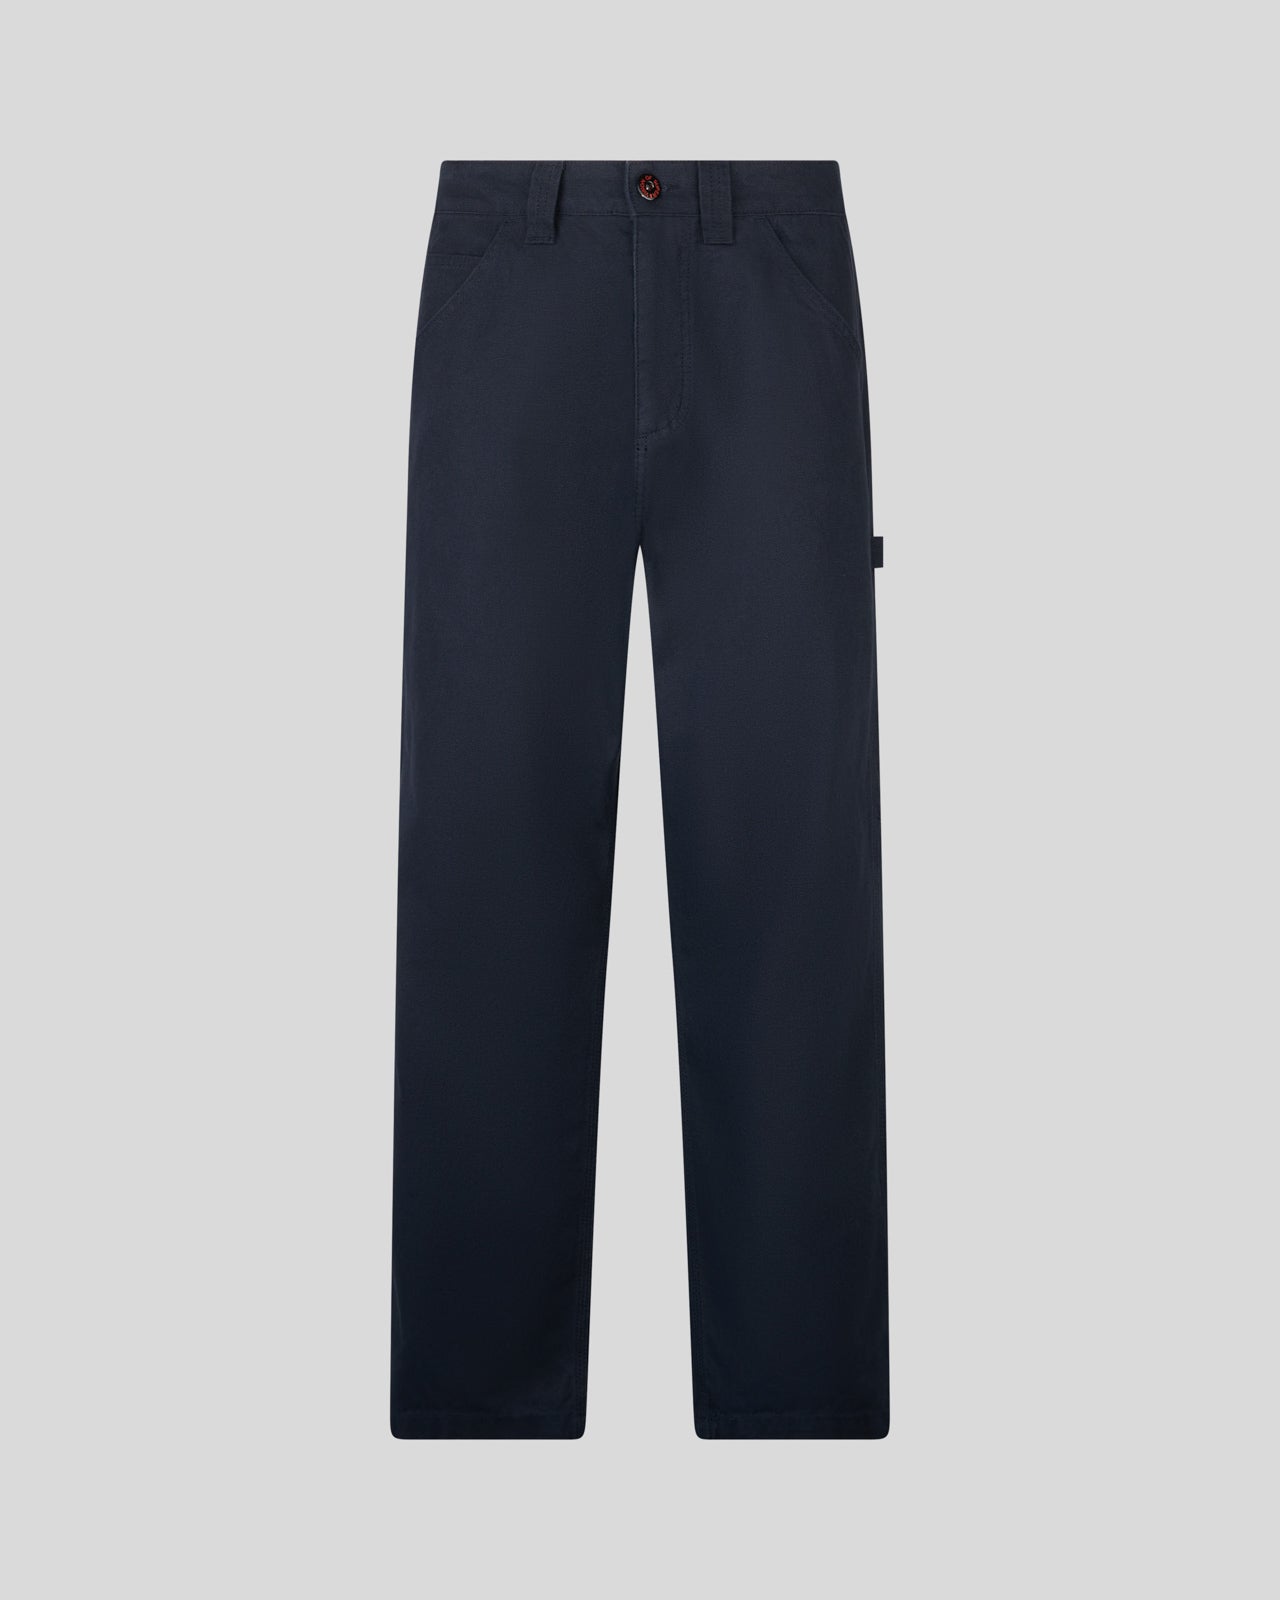 DARK BLUE WORKER PANTS WITH ICONIC FLAMES PATCH